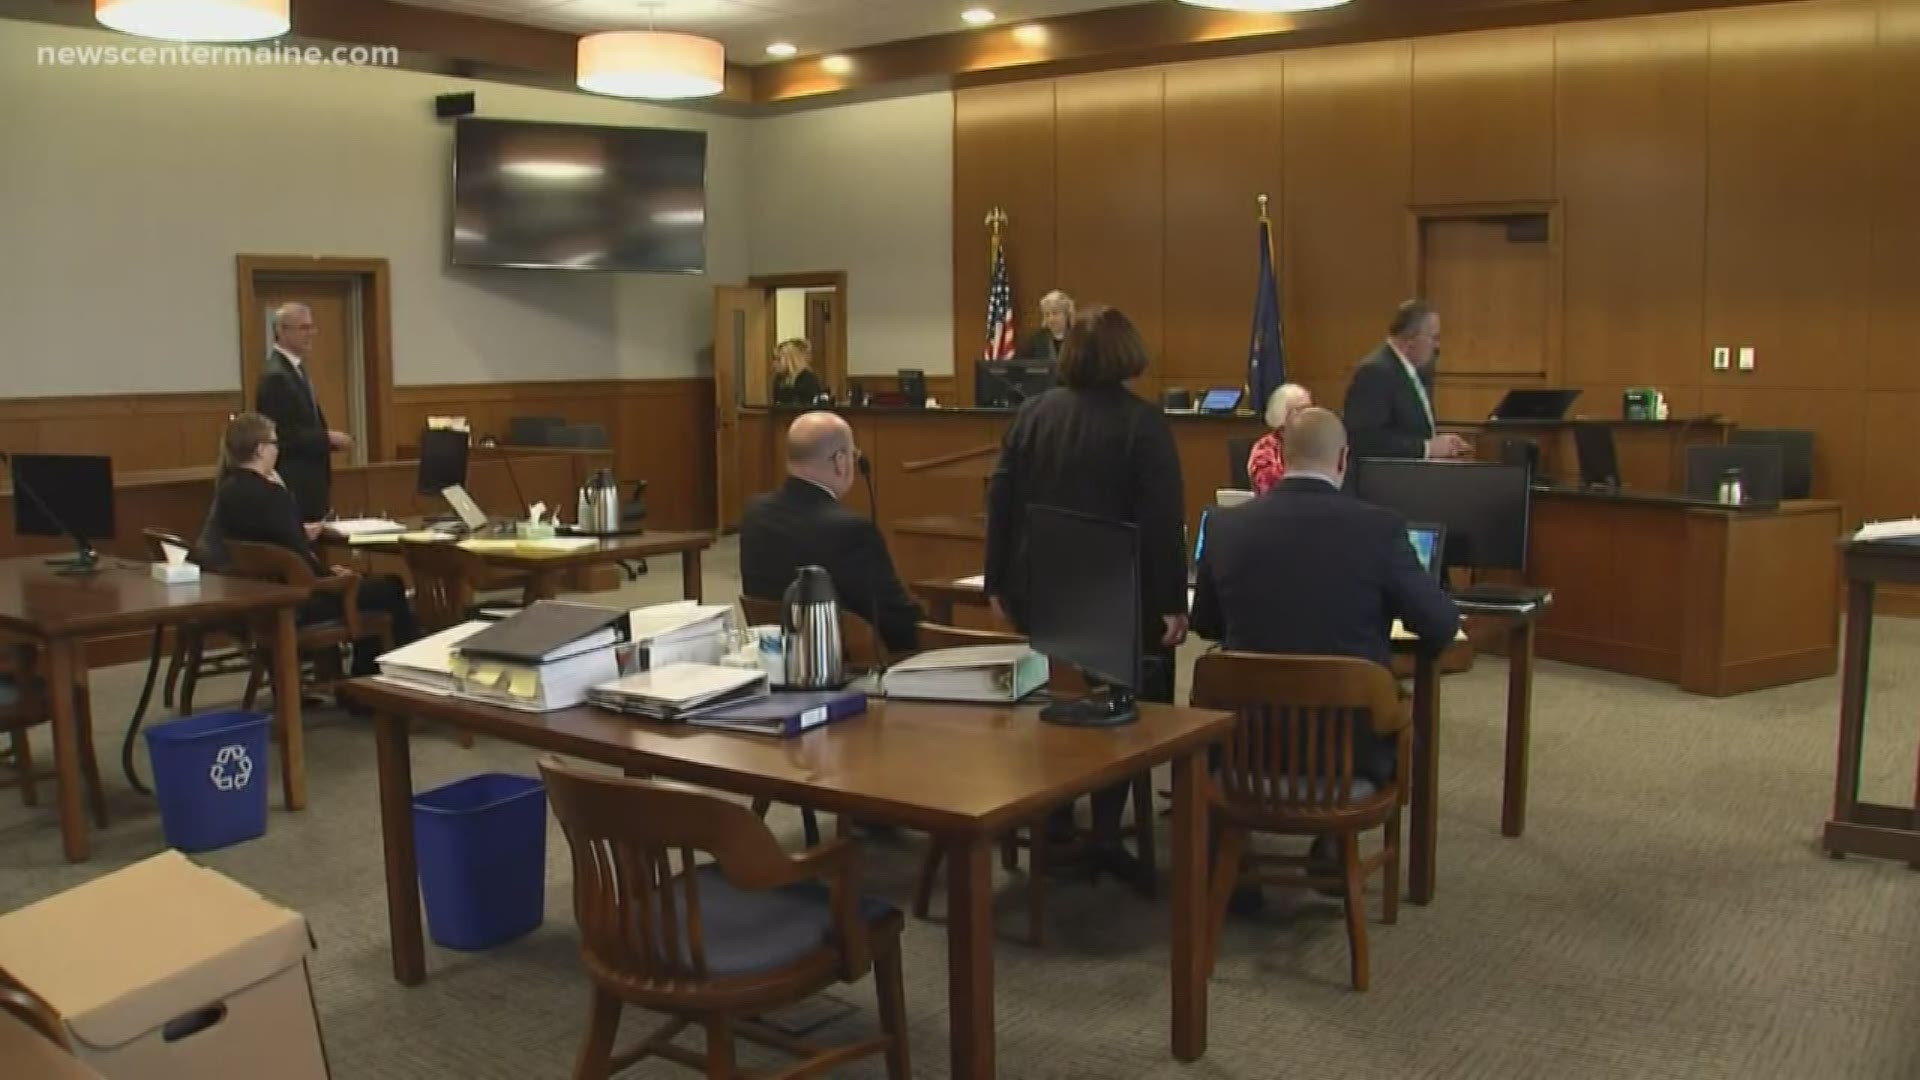 Closing arguments in Carrillo trial made; jurors expected to begin deliberation